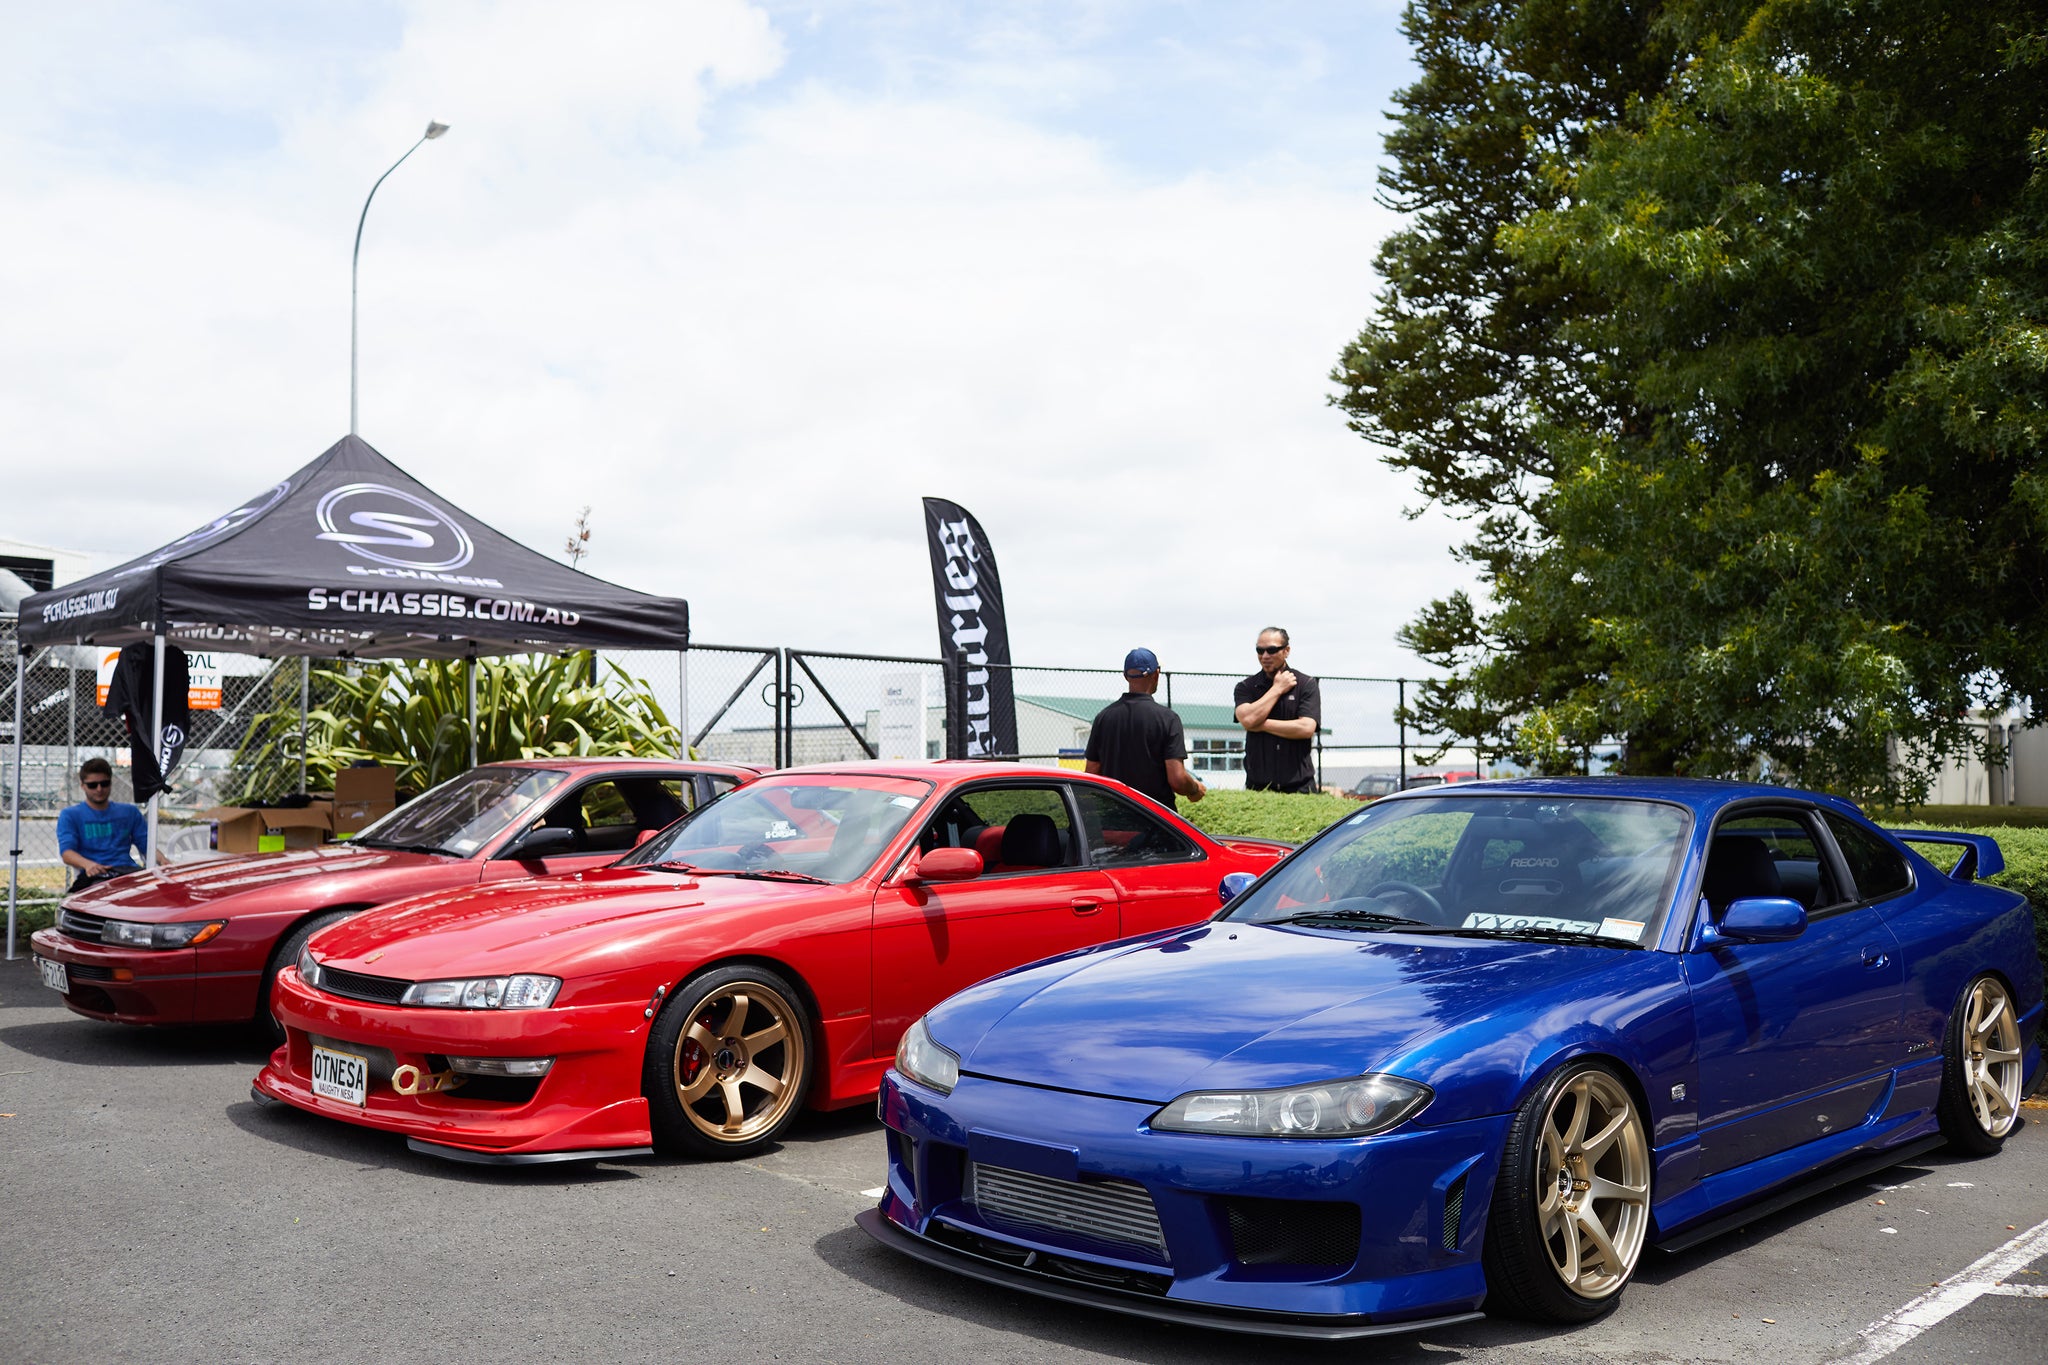 Scarles annd Schassis nissan s15, nissan s14, nissan s13